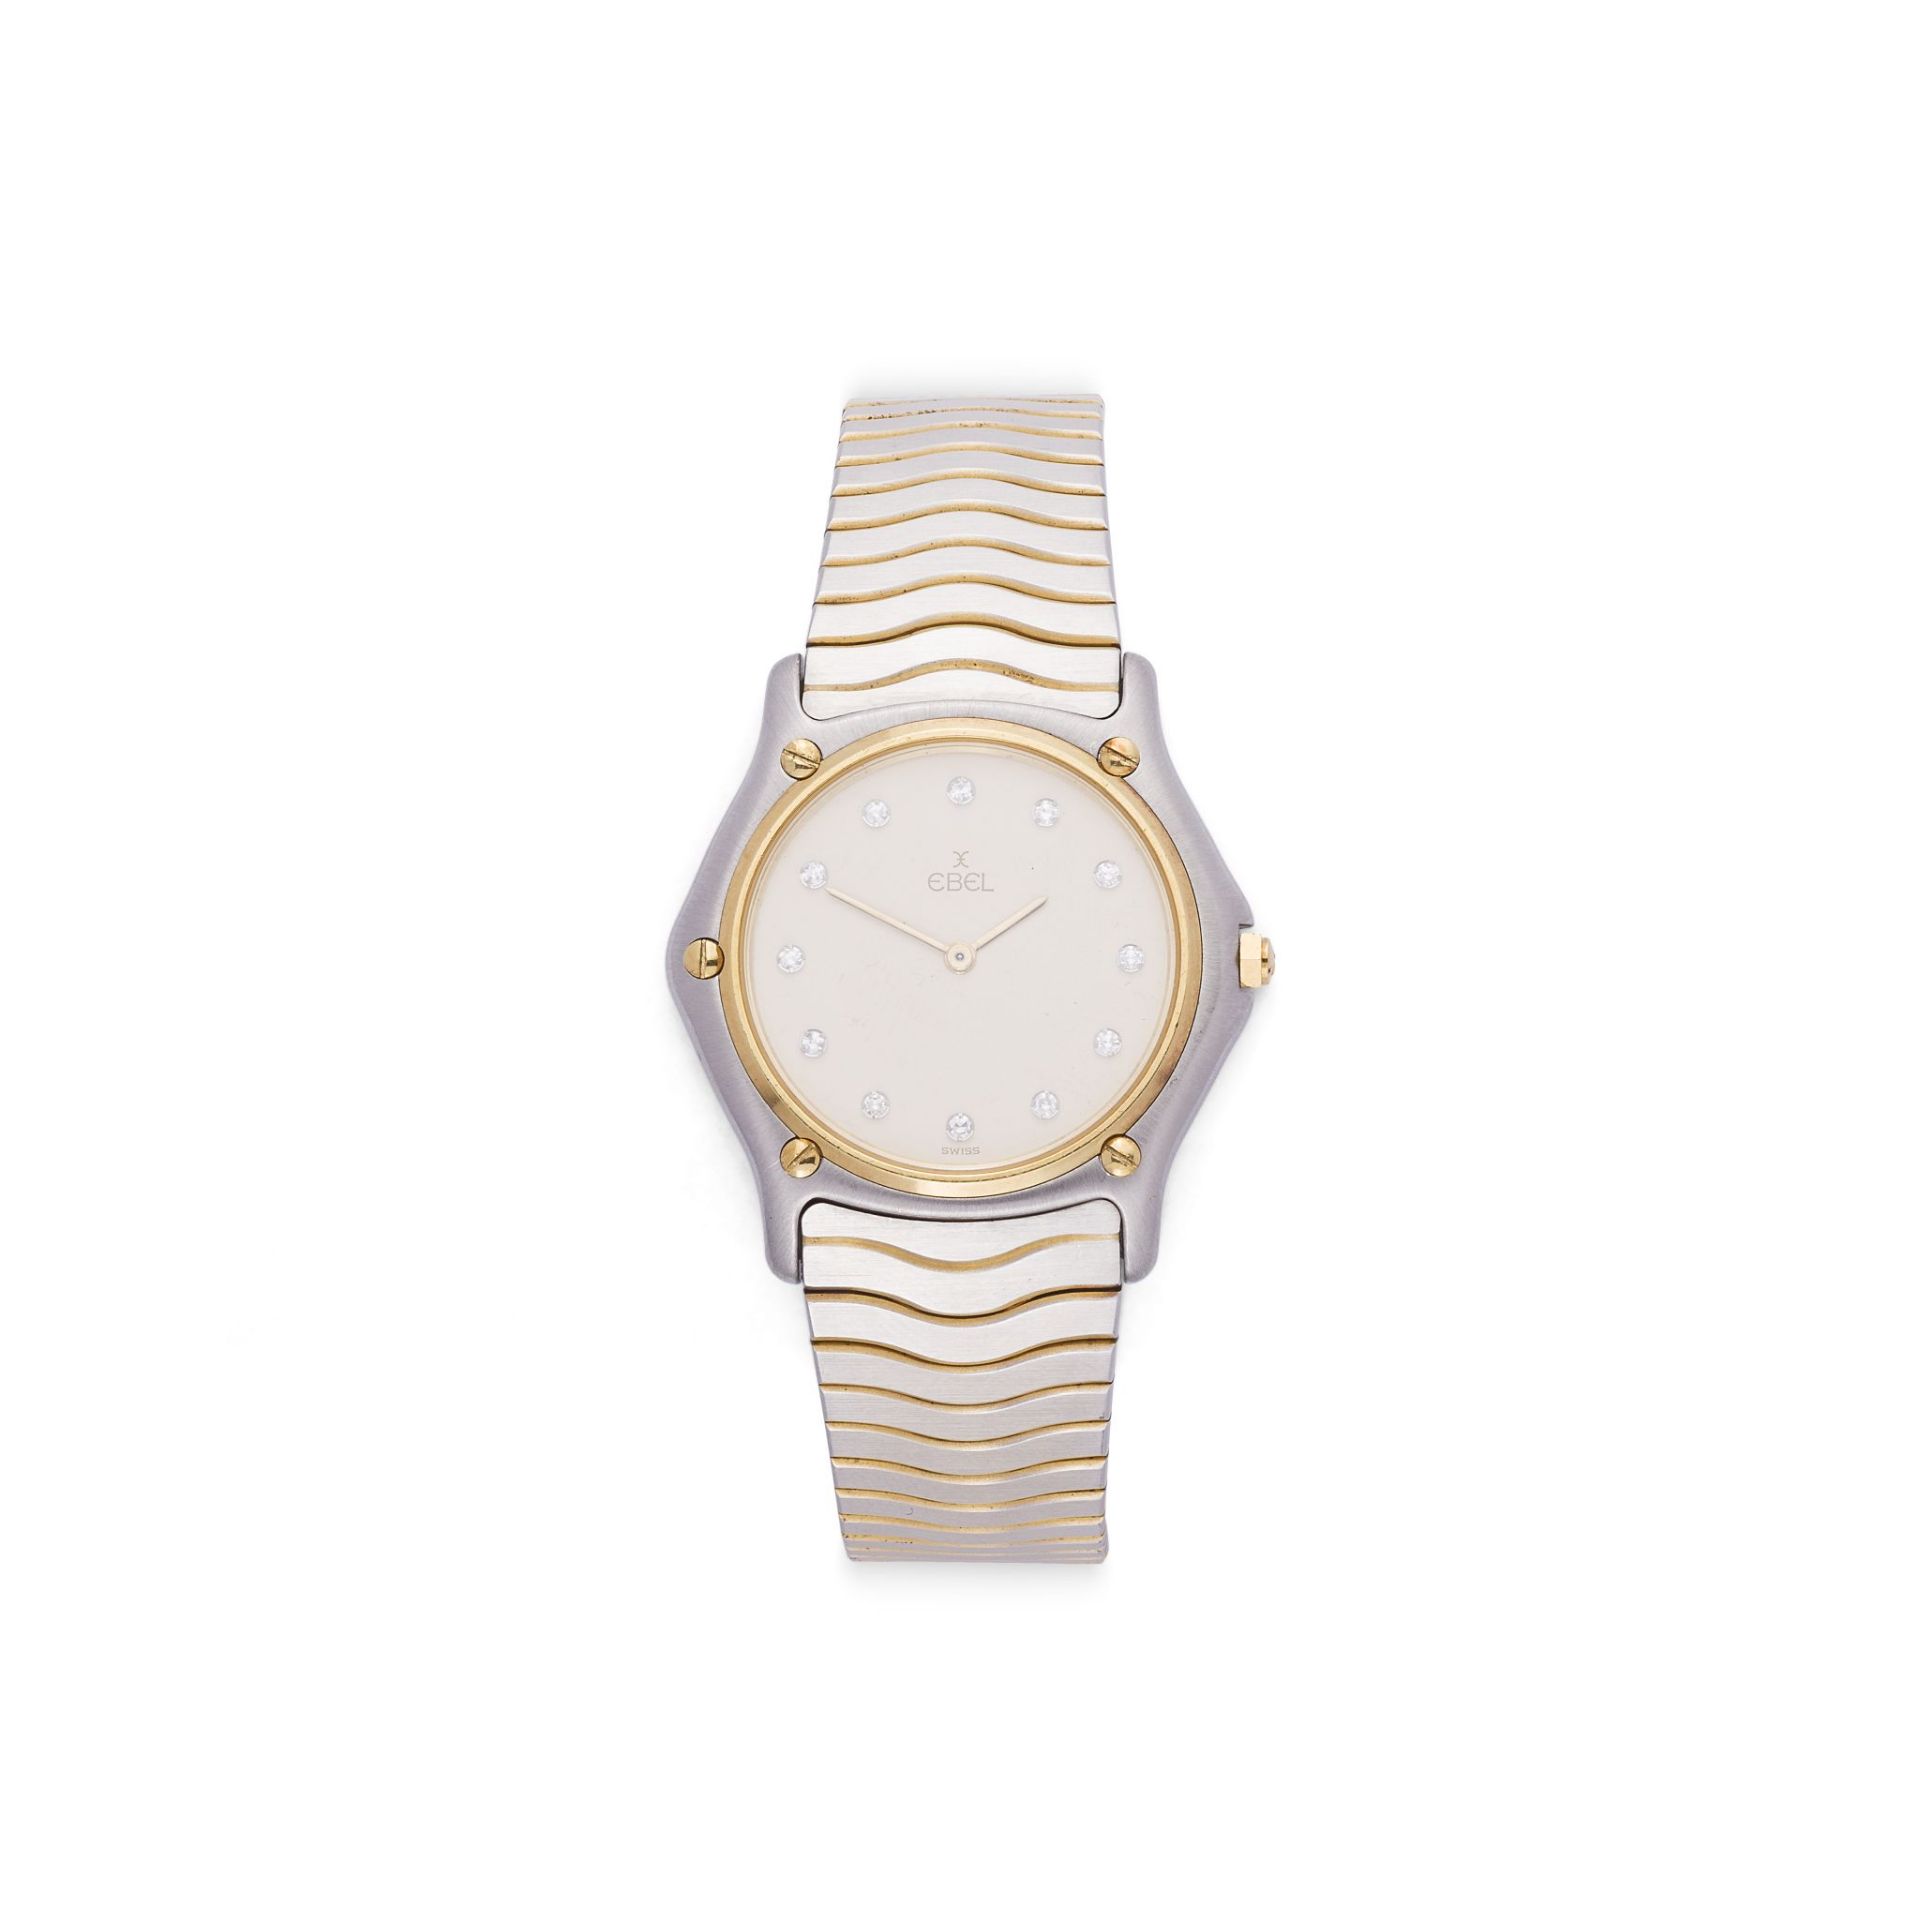 A LADY'S STAINLESS-STEEL AND GILT WRISTWATCH, BY EBEL